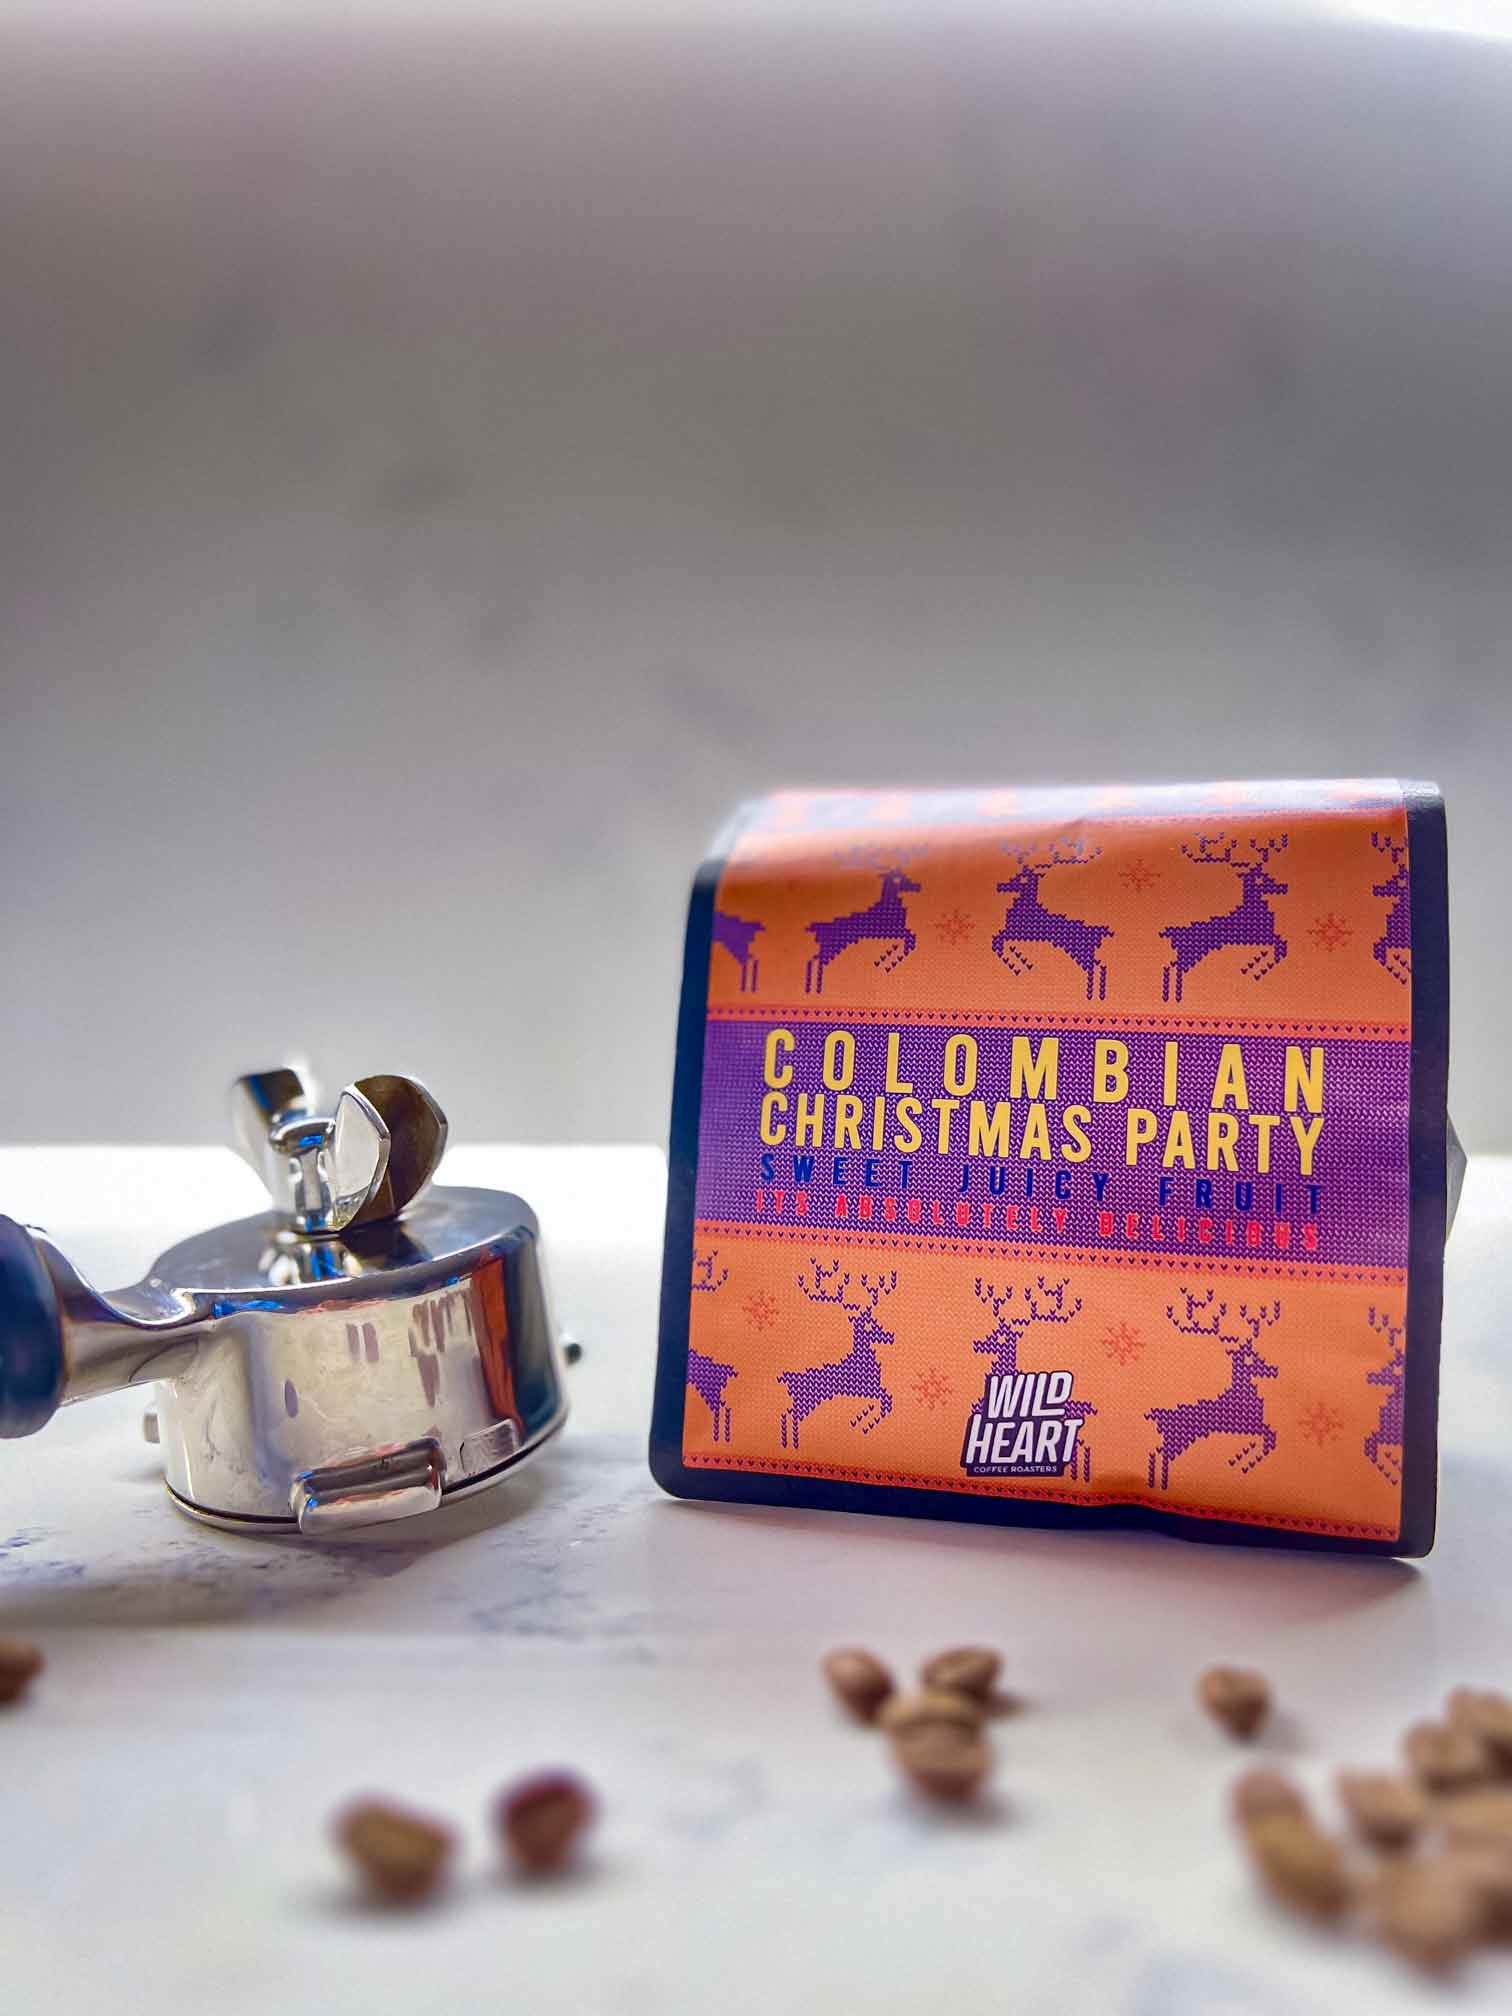 Colombian Christmas Party Fresh Roasted Coffee Beans Featured Image